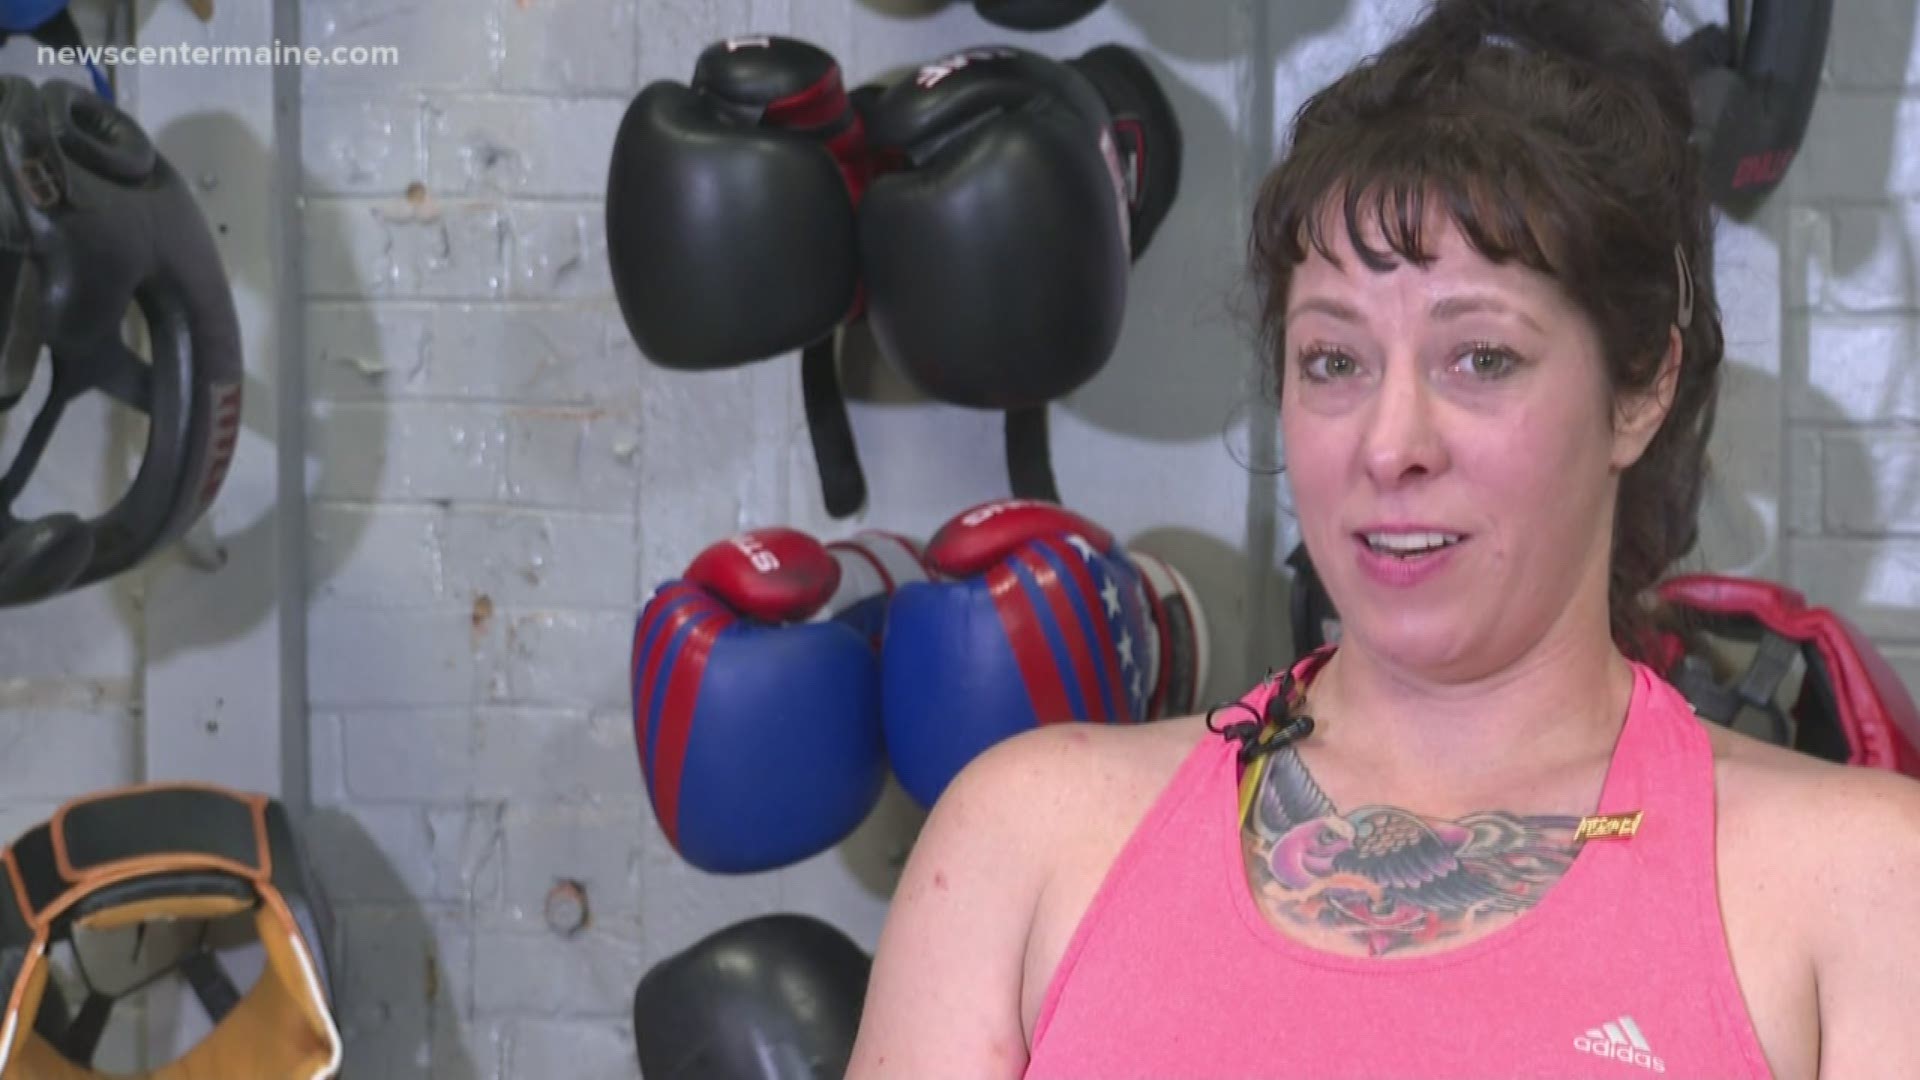 Liz Leddy turned boxing as a way to escape and is sharing her story to help save Maine children who are at risk.